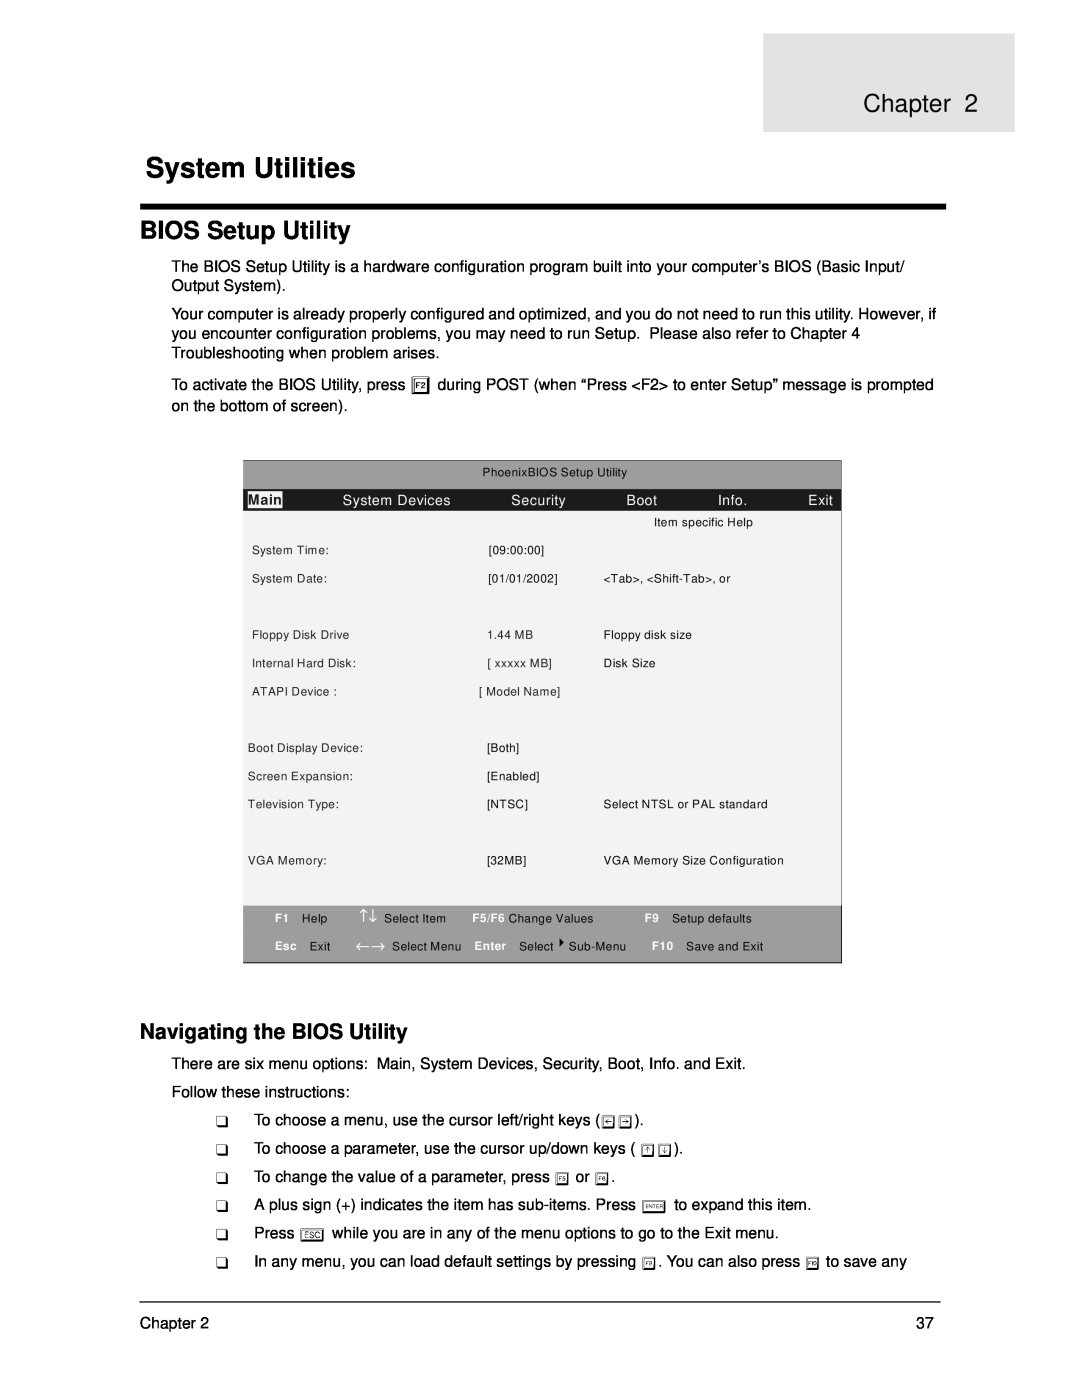 Acer 270 manual System Utilities, BIOS Setup Utility, Chapter 